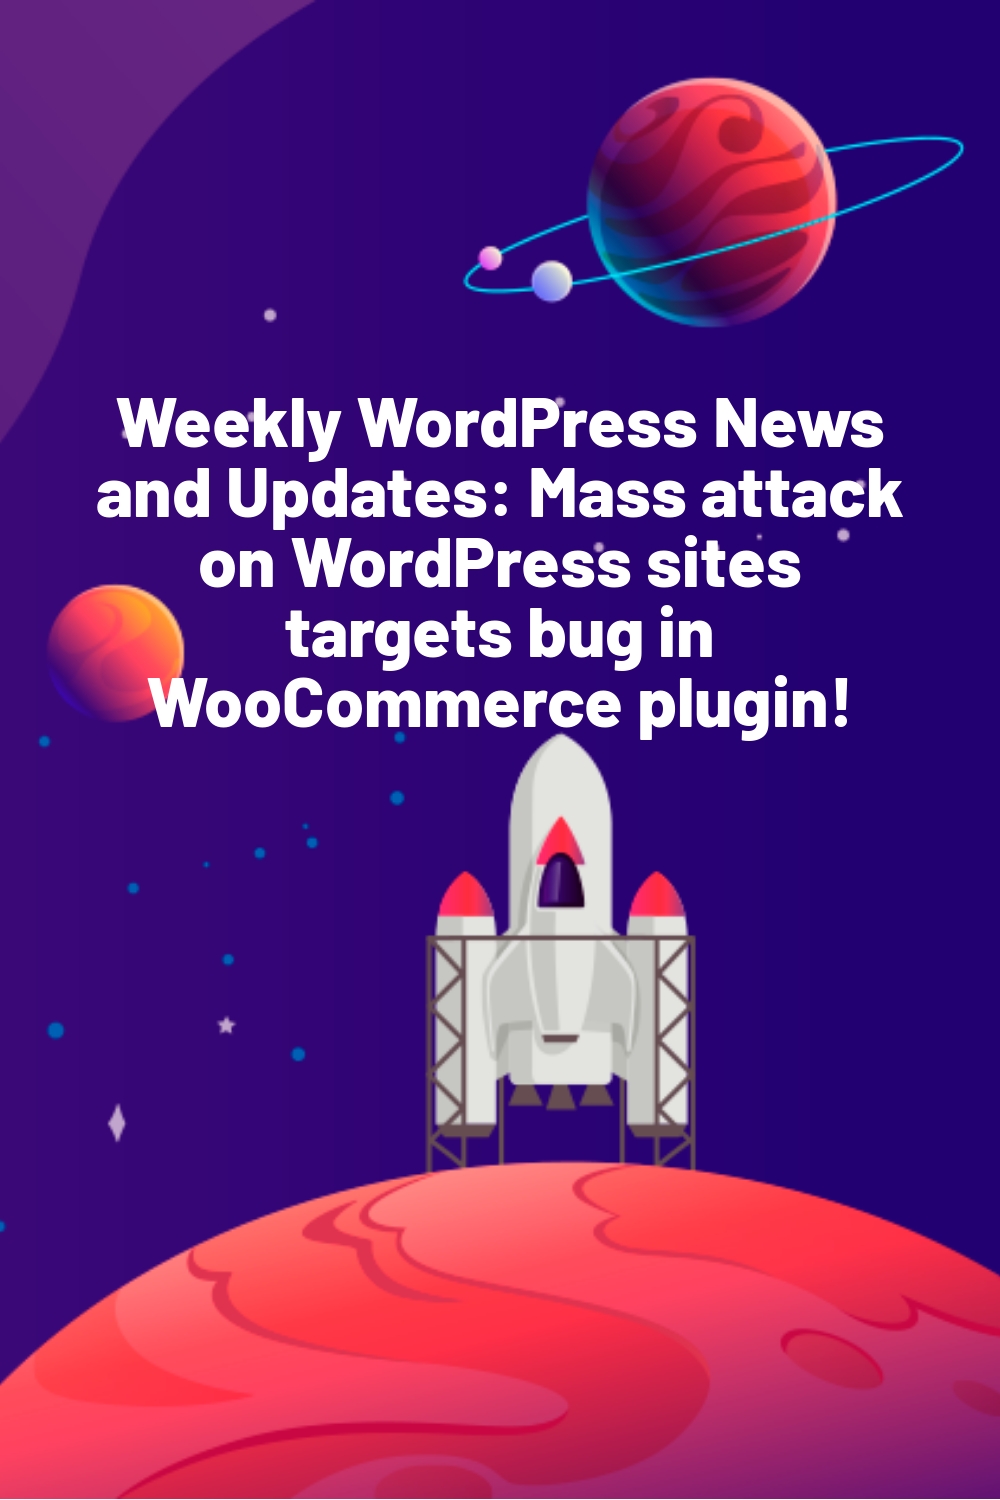 Weekly WordPress News and Updates: Mass attack on WordPress sites targets bug in WooCommerce plugin!